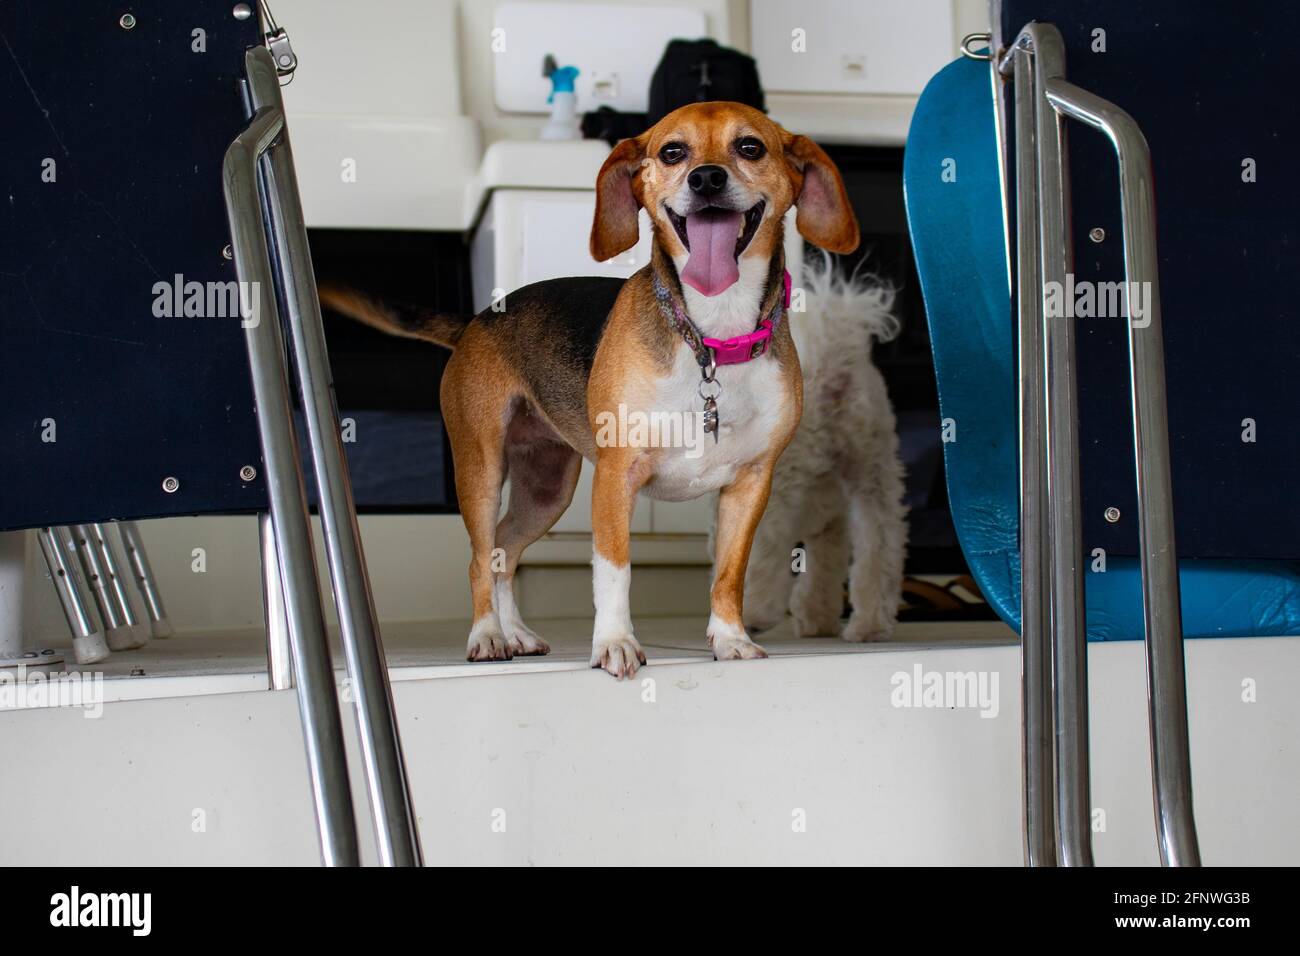 Boat dog - happy brown and white dog with a smile and pink collar and her tongue hanging out on a boat Stock Photo